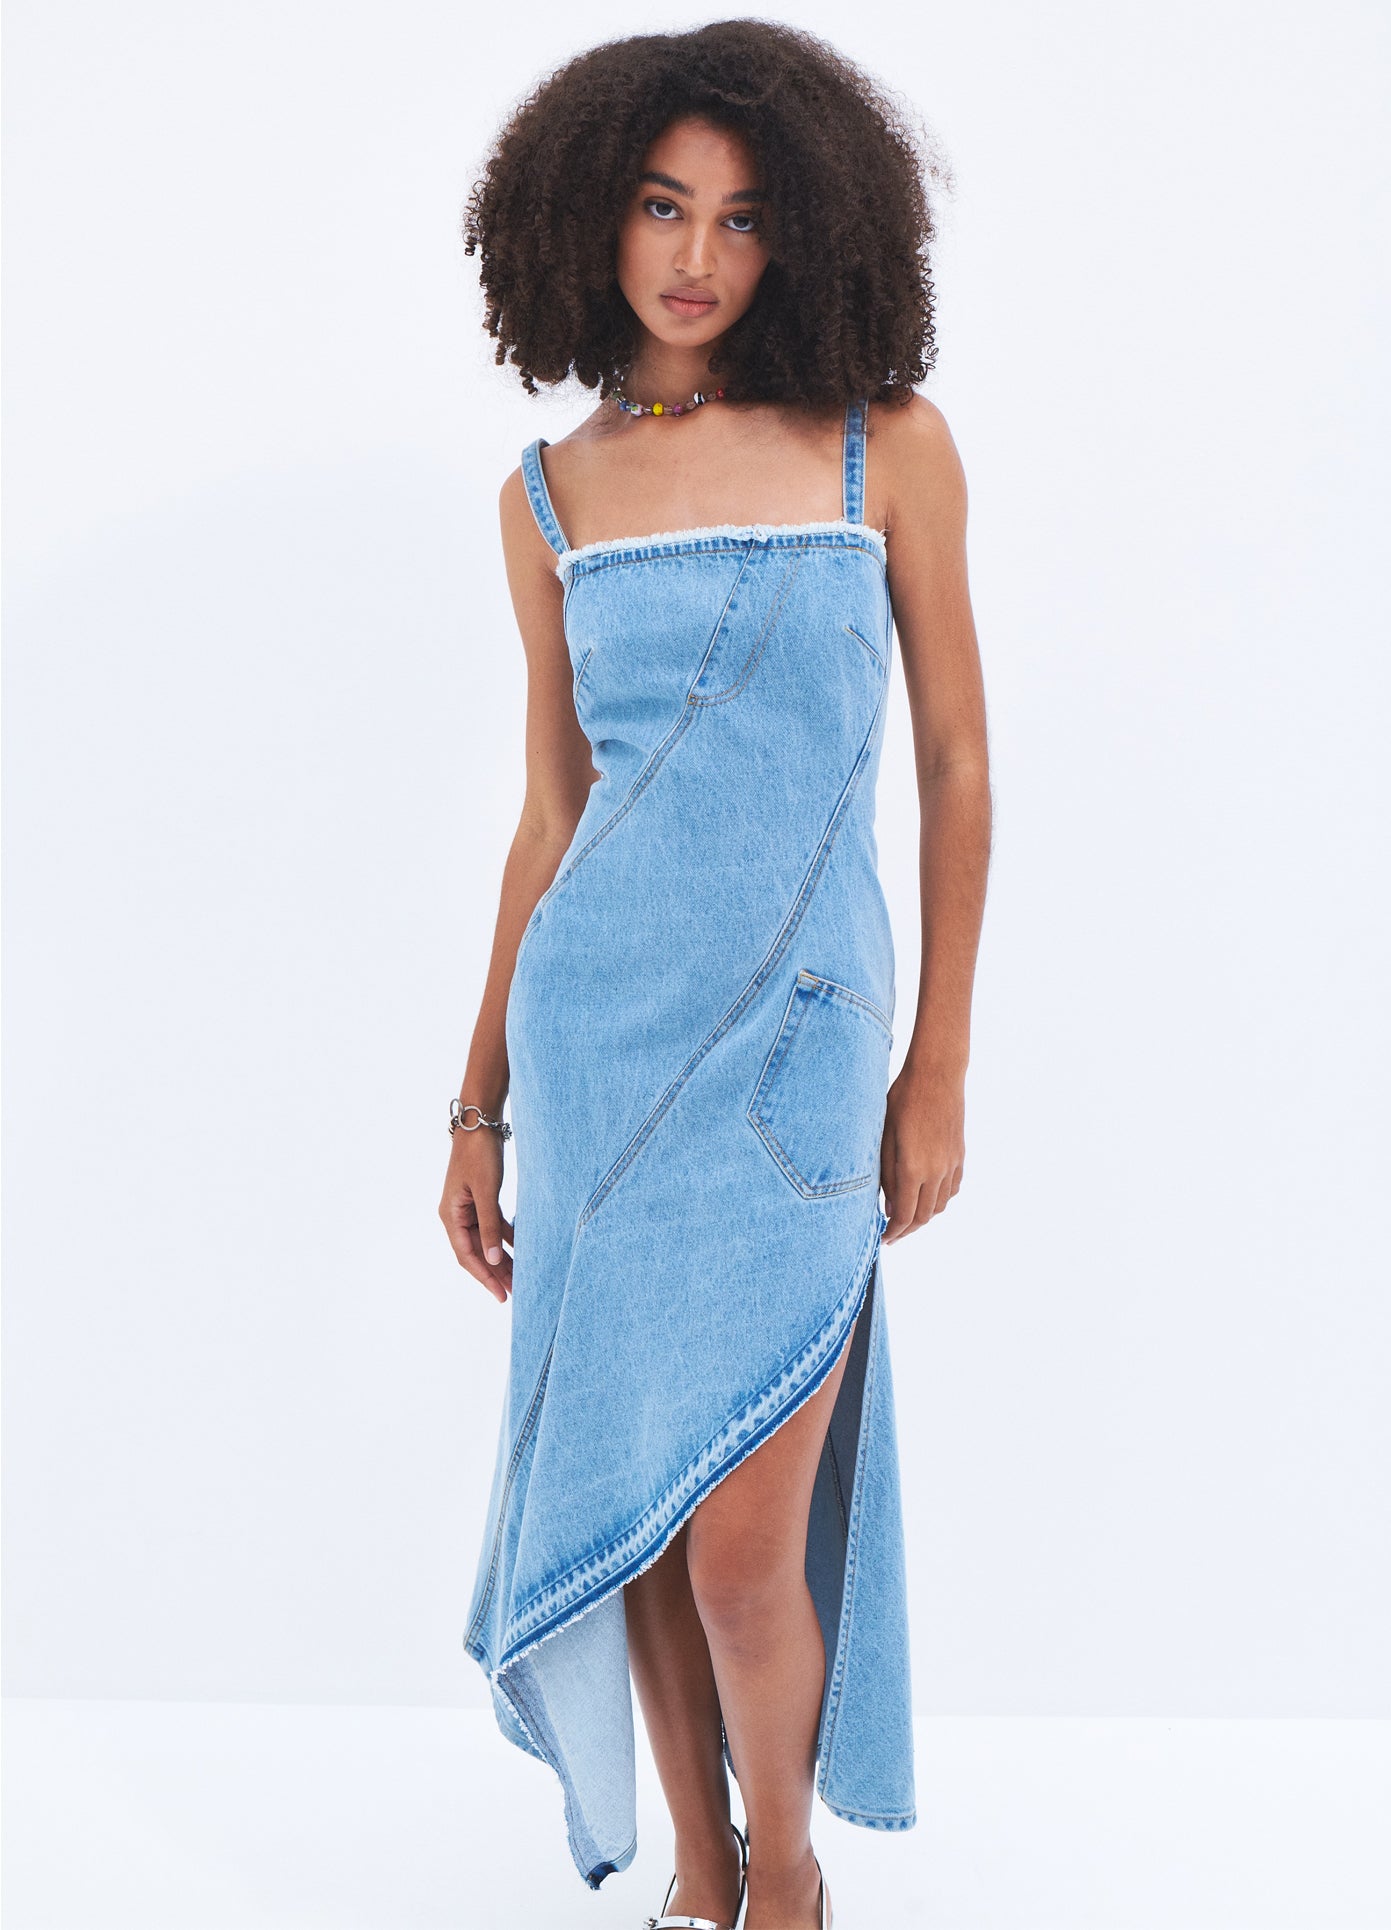 MONSE Twisted Denim Dress in Indigo on model front view